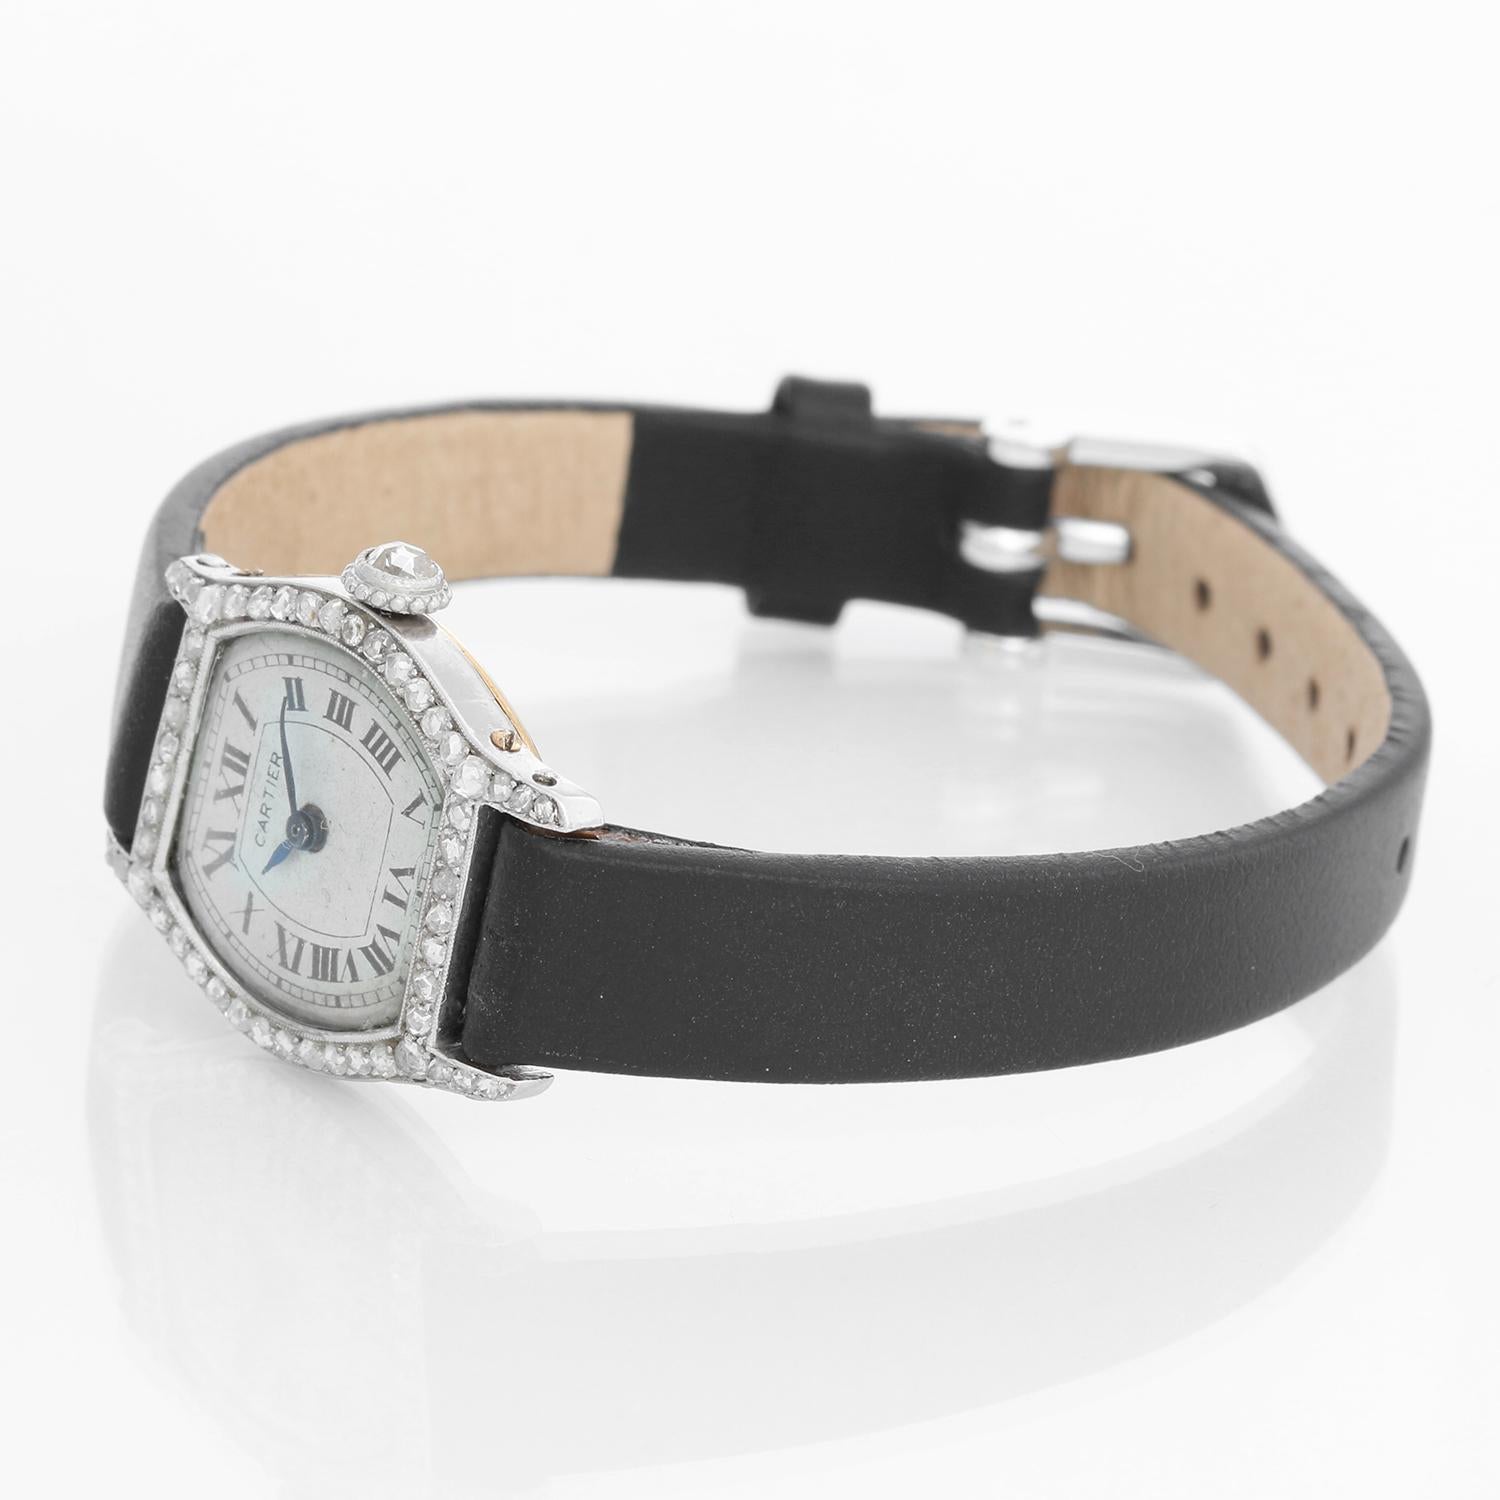 Cartier Tortue Ladies Platinum Watch - Manual winding. Platinum case with diamonds with a yellow gold caseback( 20 mm x 27mm). White dial with roman numerals. Black leather strap with tang buckle. Pre-owned with custom box. Circa 1920's. 